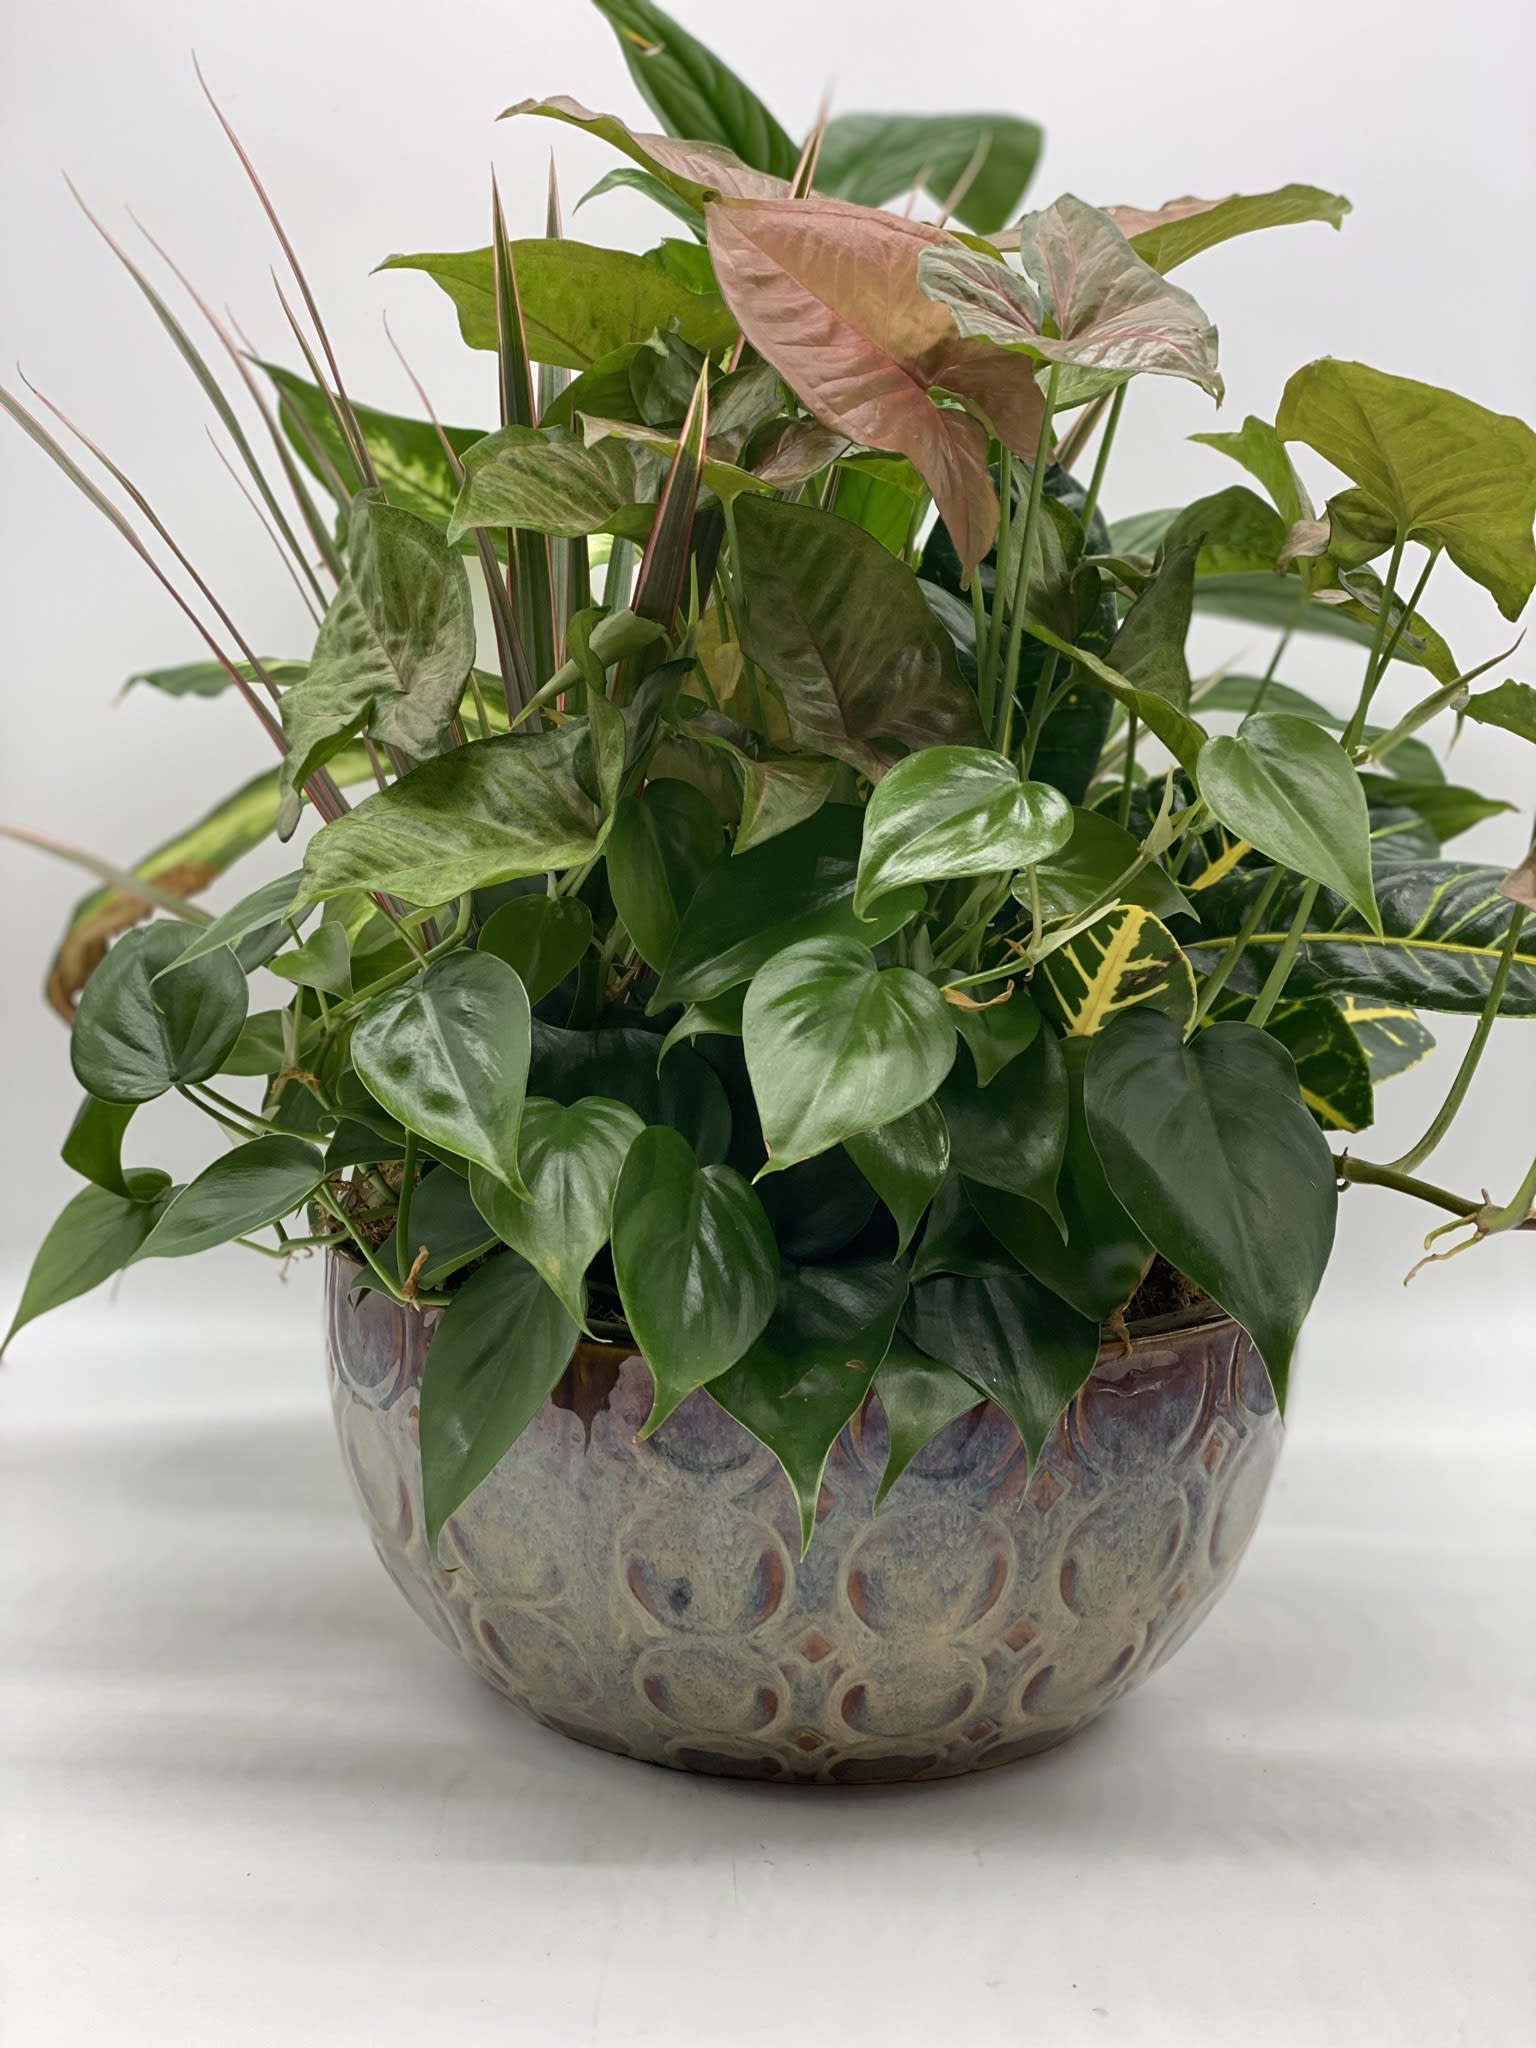 Large Ceramic Dish Garden (Mixture of Plants) - Always available for pick up or delivery - this fresh mix of house plants in a ceramic container.  ATTN: The container and plant variety may vary but will be similar. 